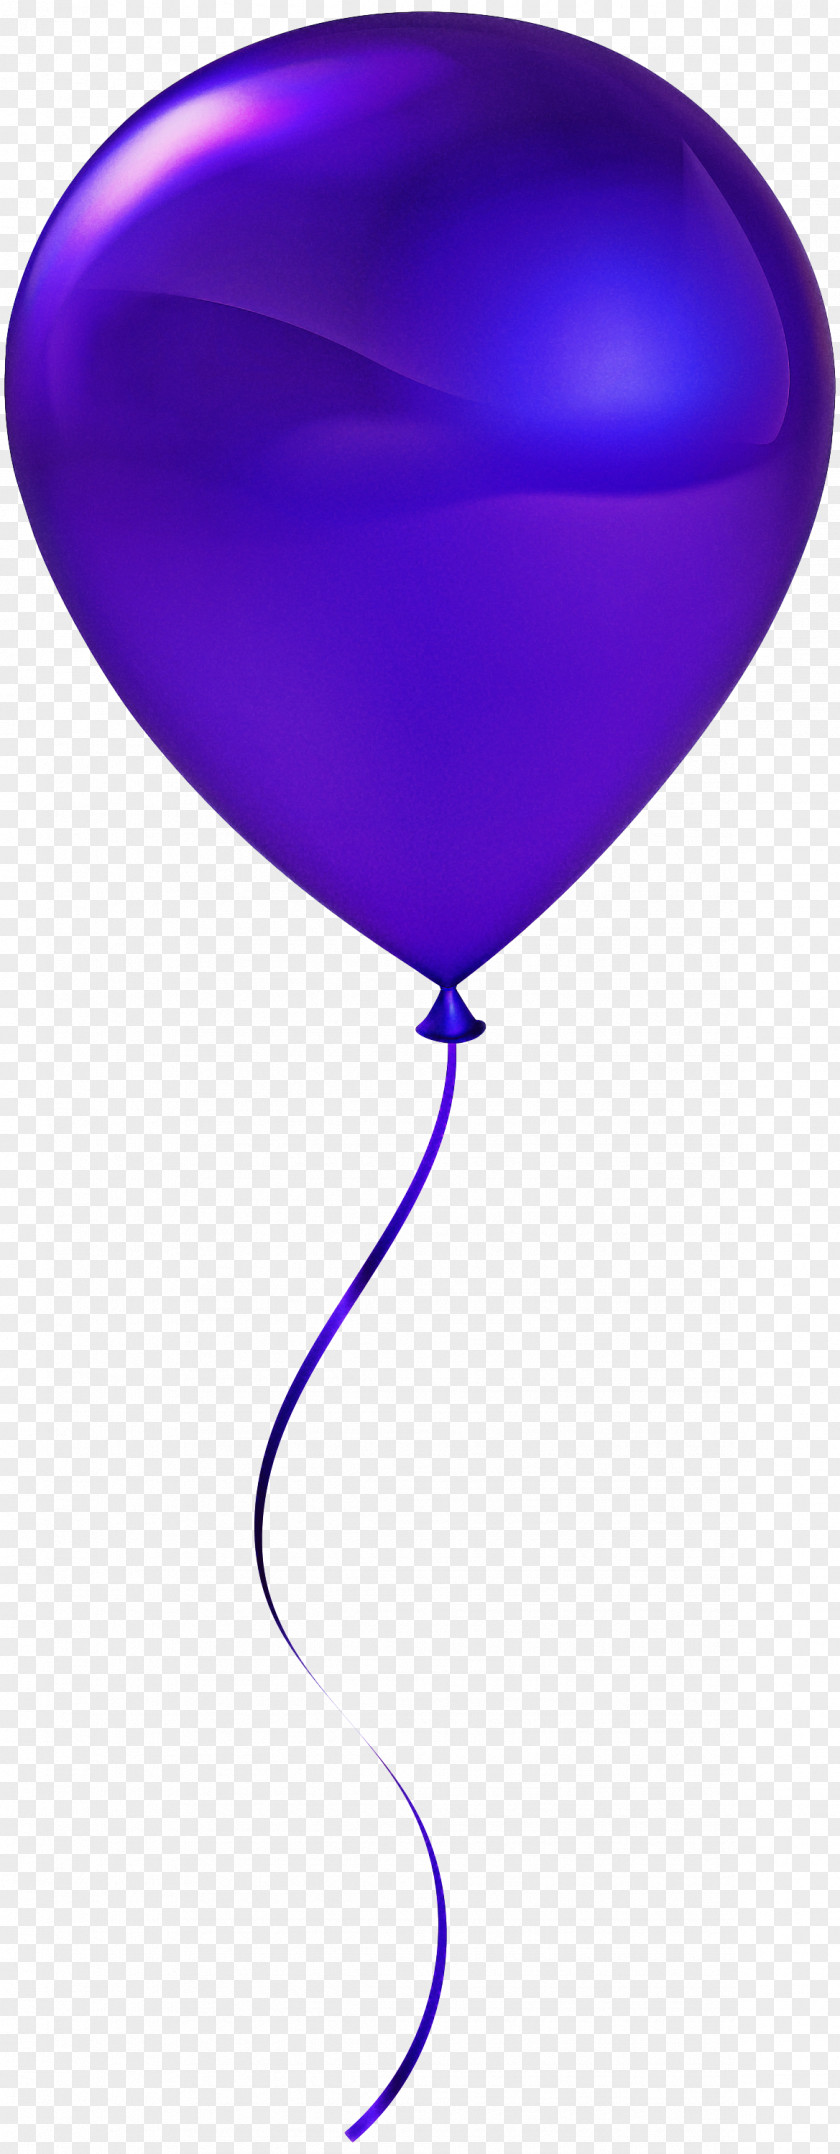 Party Supply Magenta Violet Purple Balloon Cobalt Blue PNG